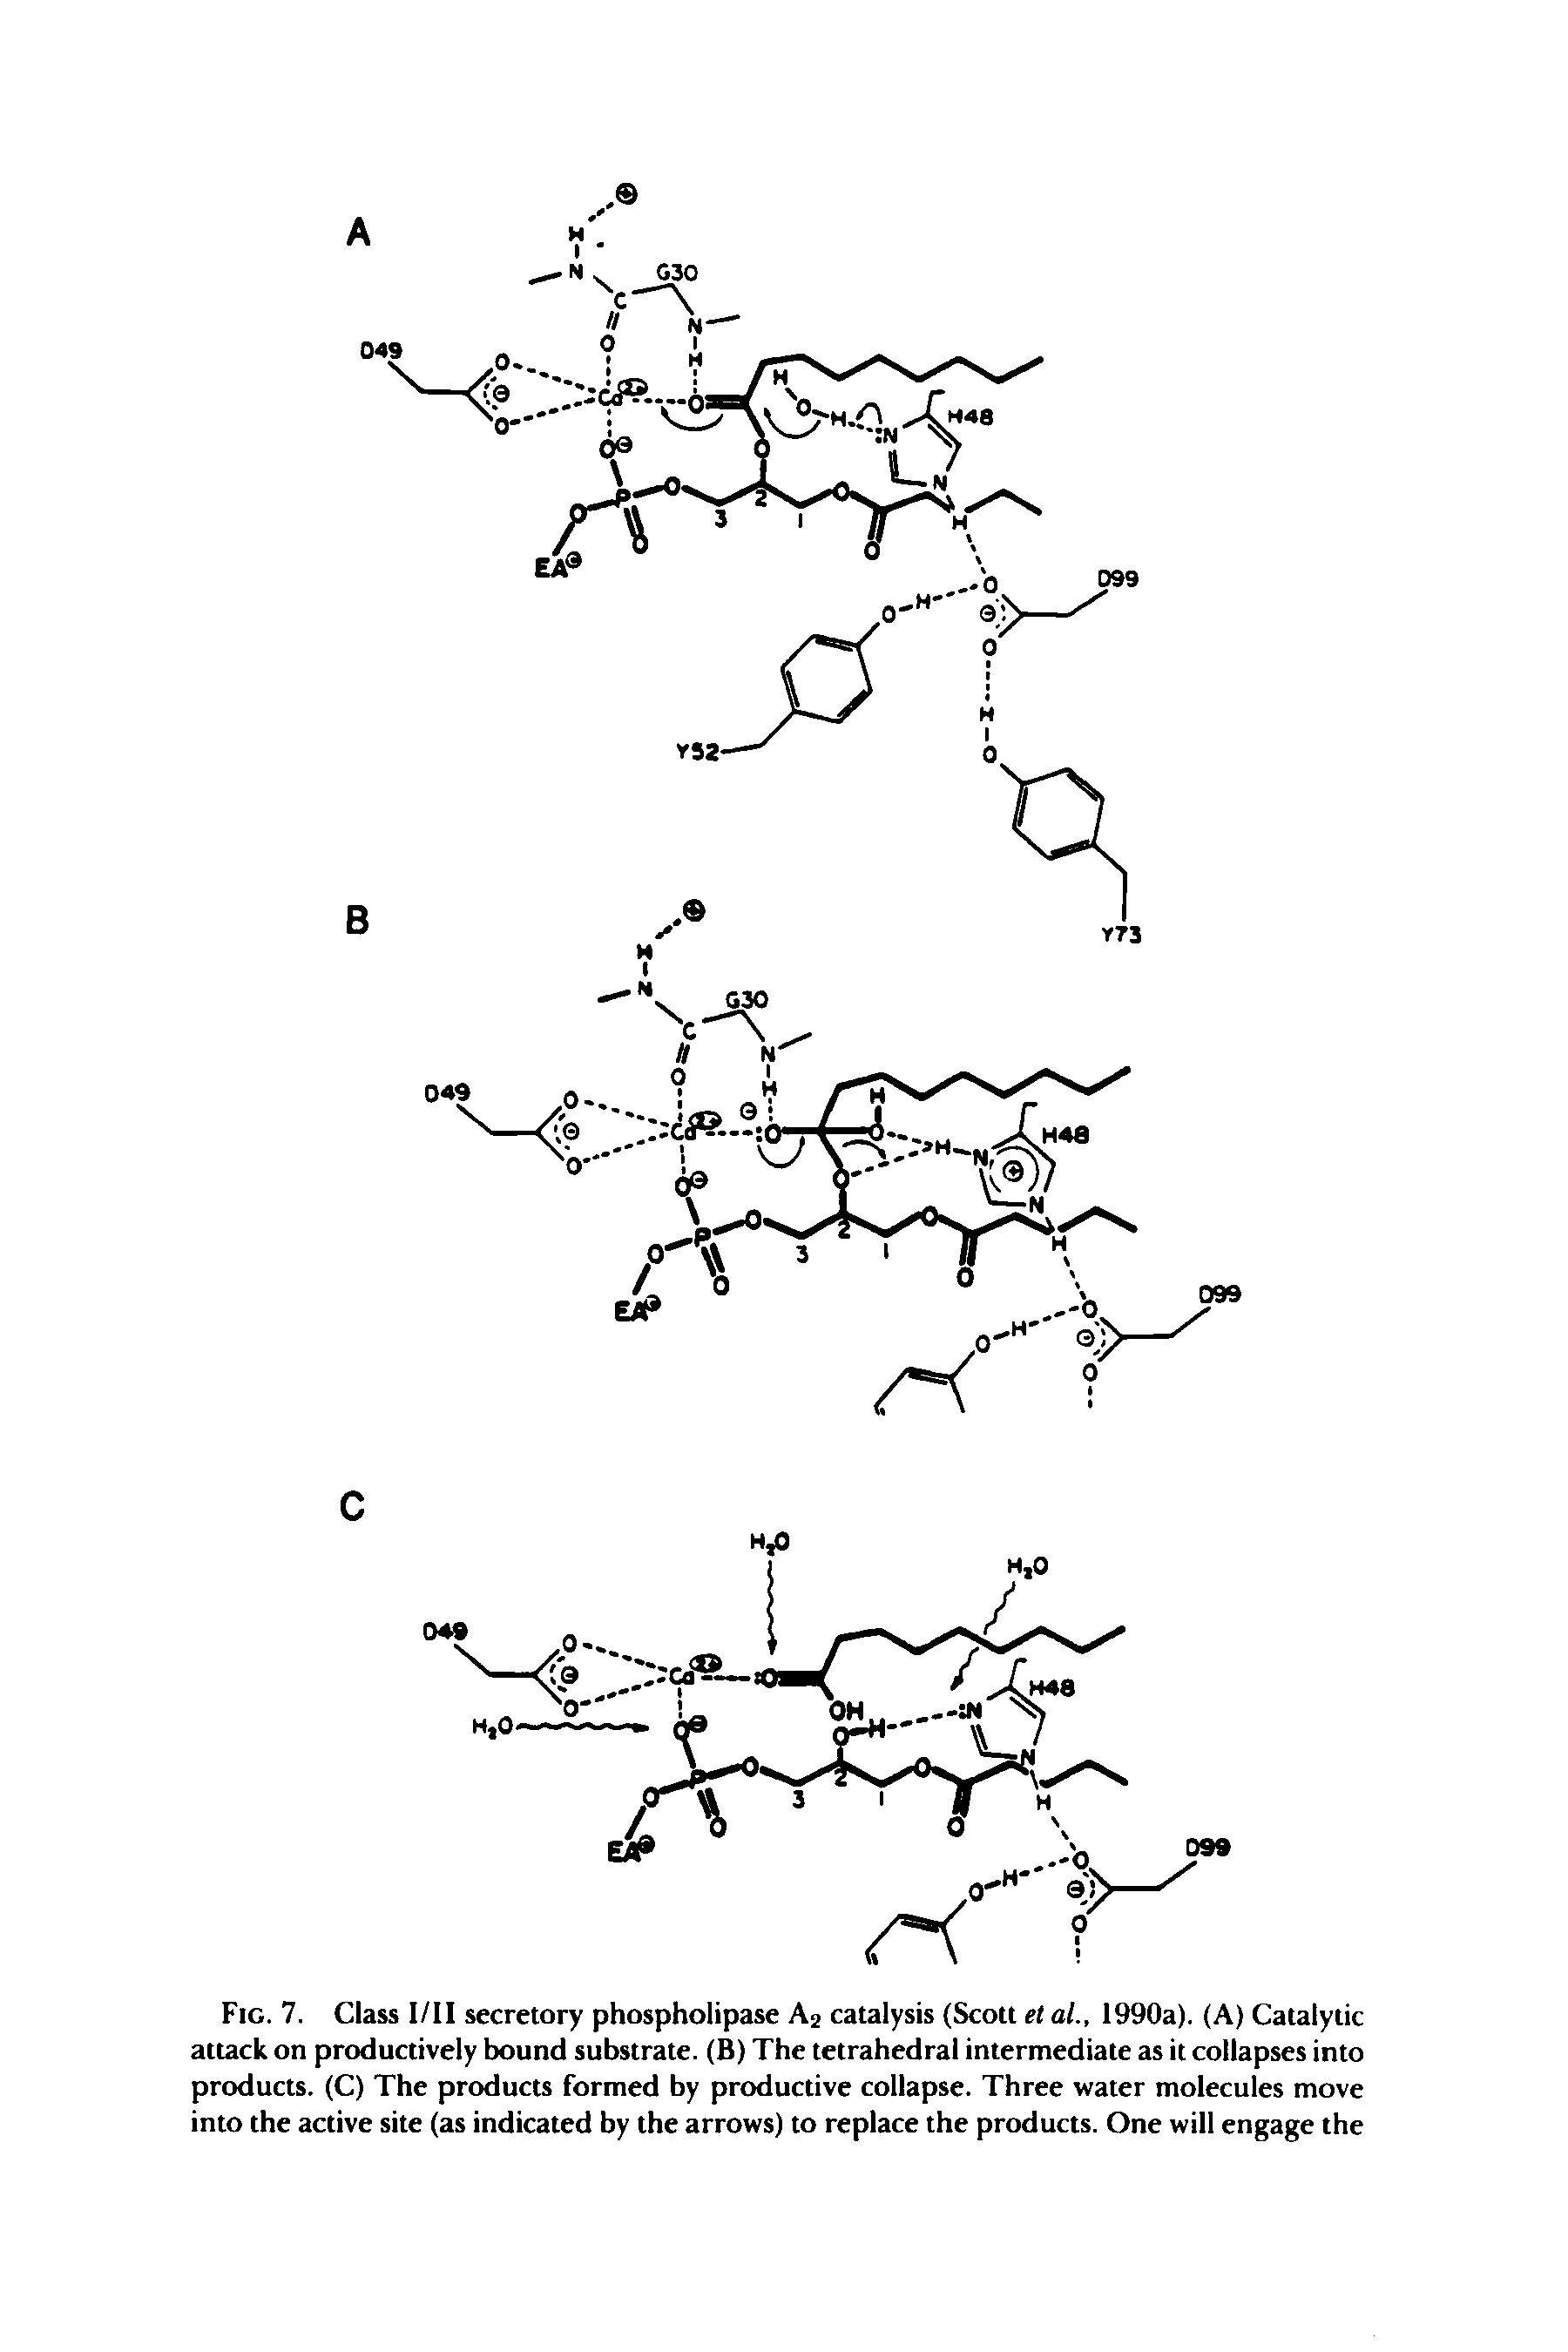 Fig. 7. Class I/II secretory phospholipase Aj catalysis (Scott et al., 1990a). (A) Catalytic attack on productively bound substrate. (B) The tetrahedral intermediate as it collapses into products. (C) The products formed by productive collapse. Three water molecules move into the active site (as indicated by the arrows) to replace the products. One will engage the...